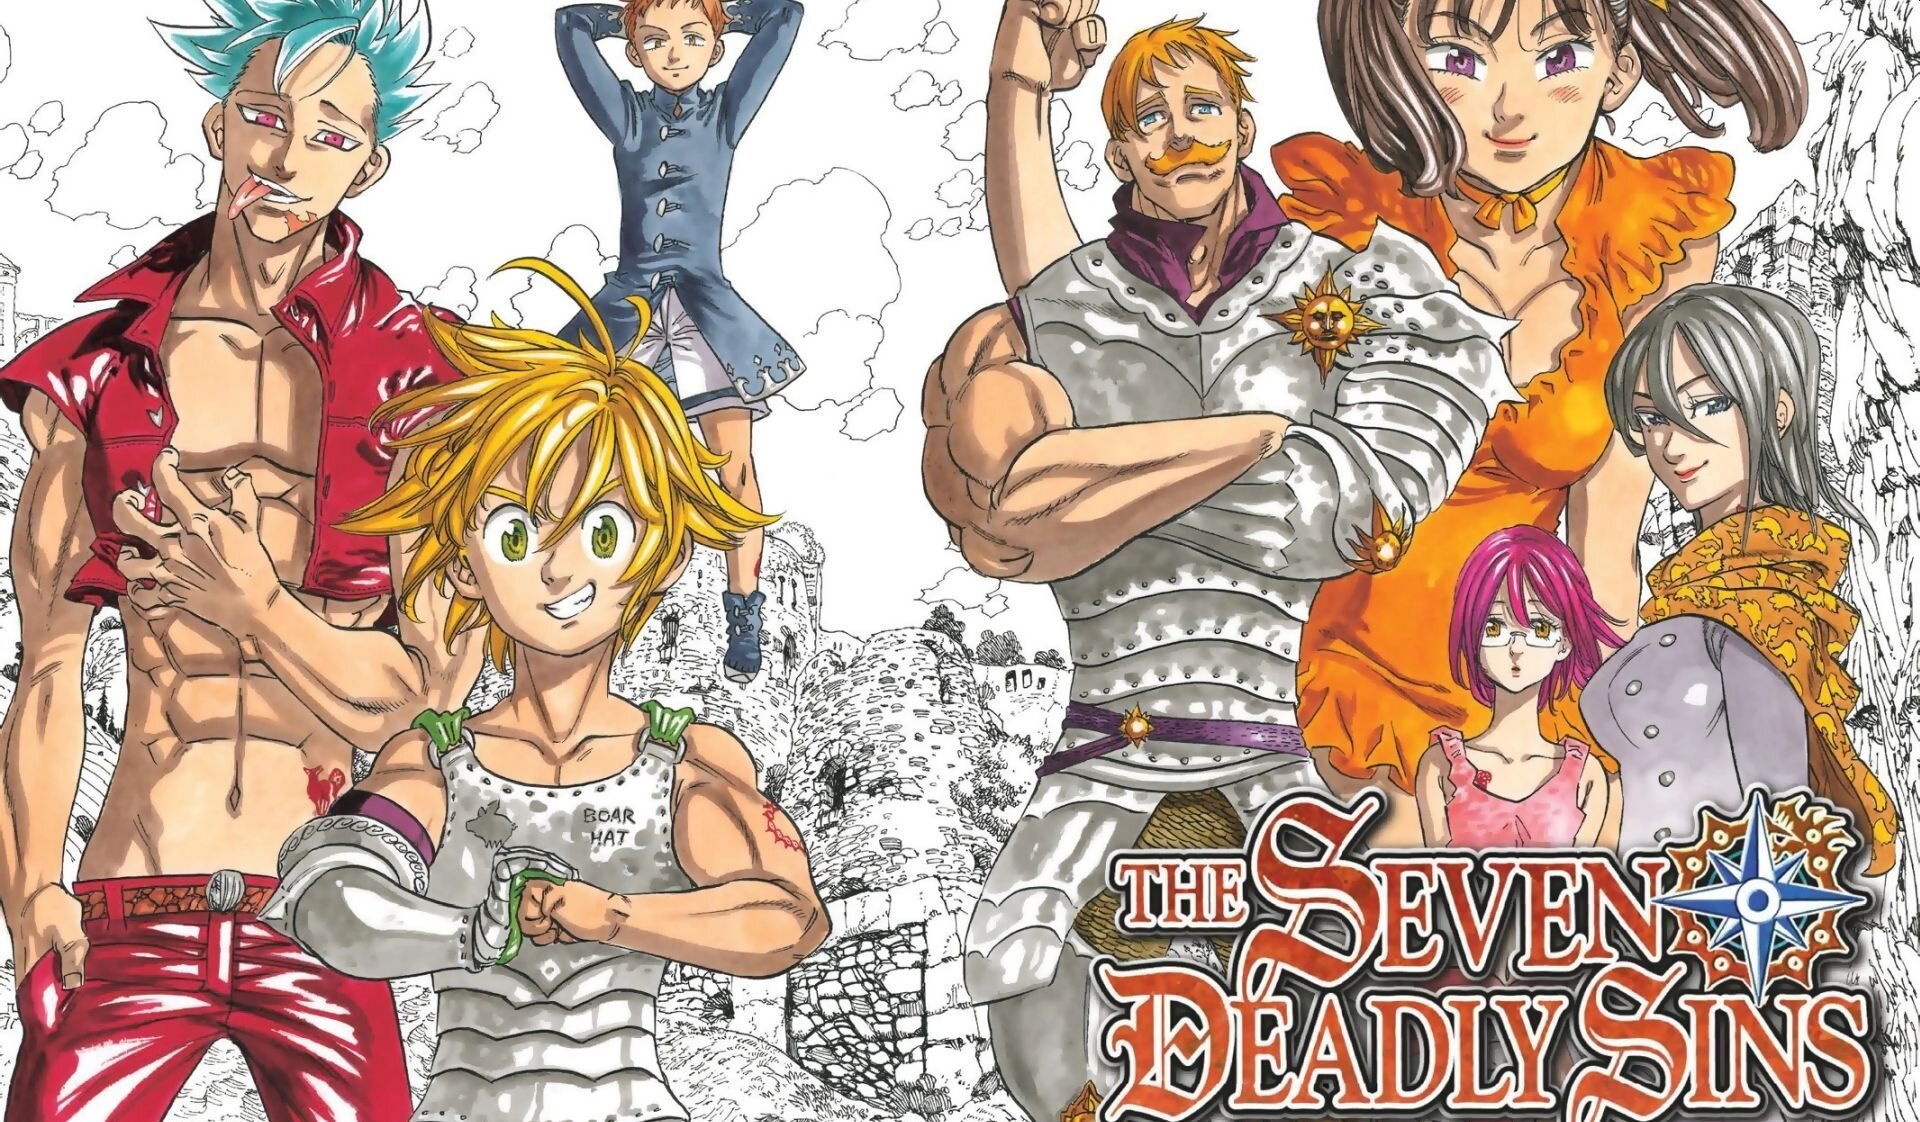 Seven Deadly Sins: Anger’s Judgement will be the 4th Season of the